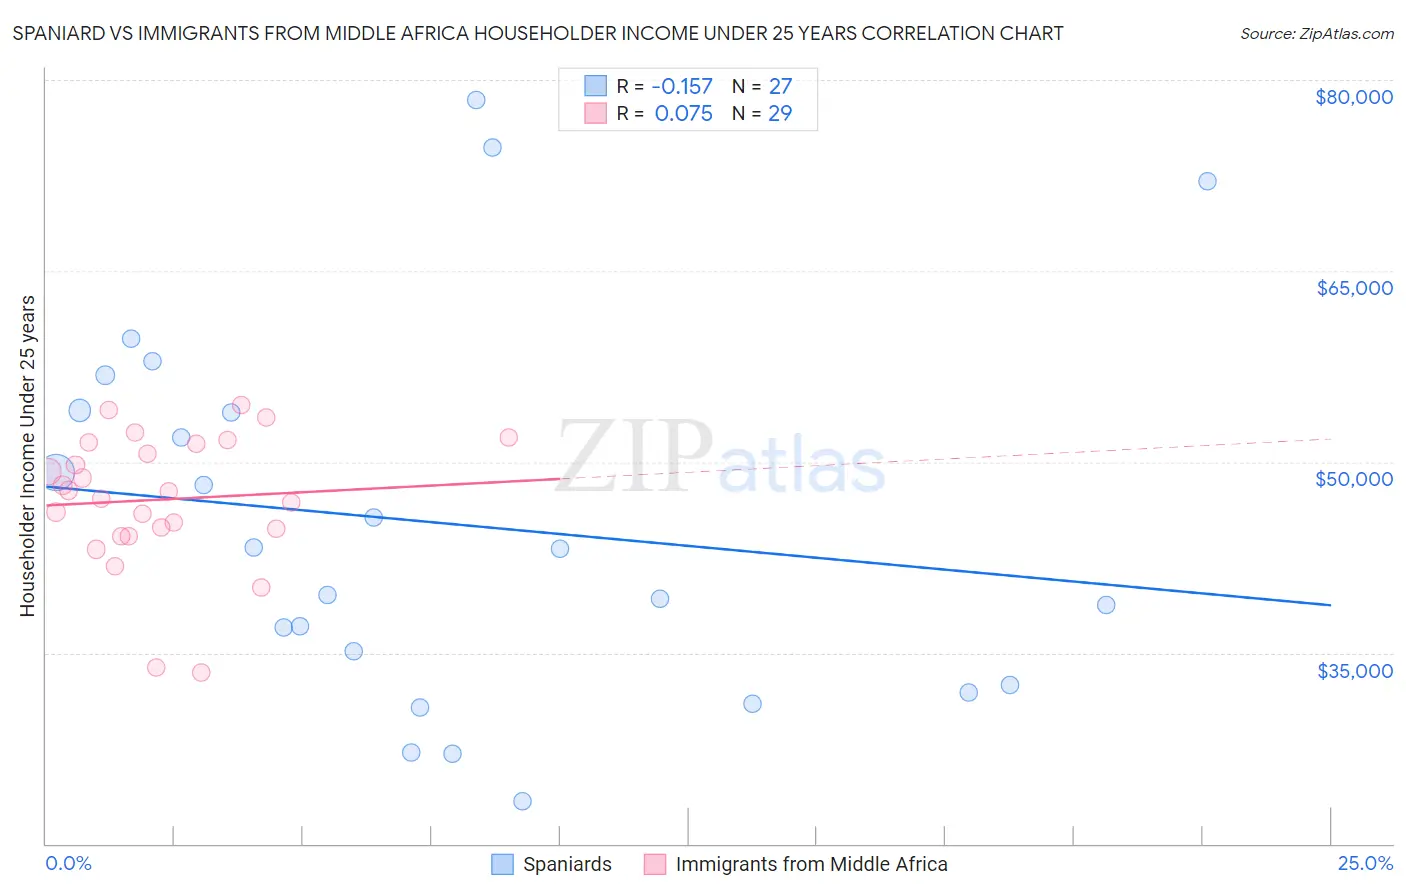 Spaniard vs Immigrants from Middle Africa Householder Income Under 25 years